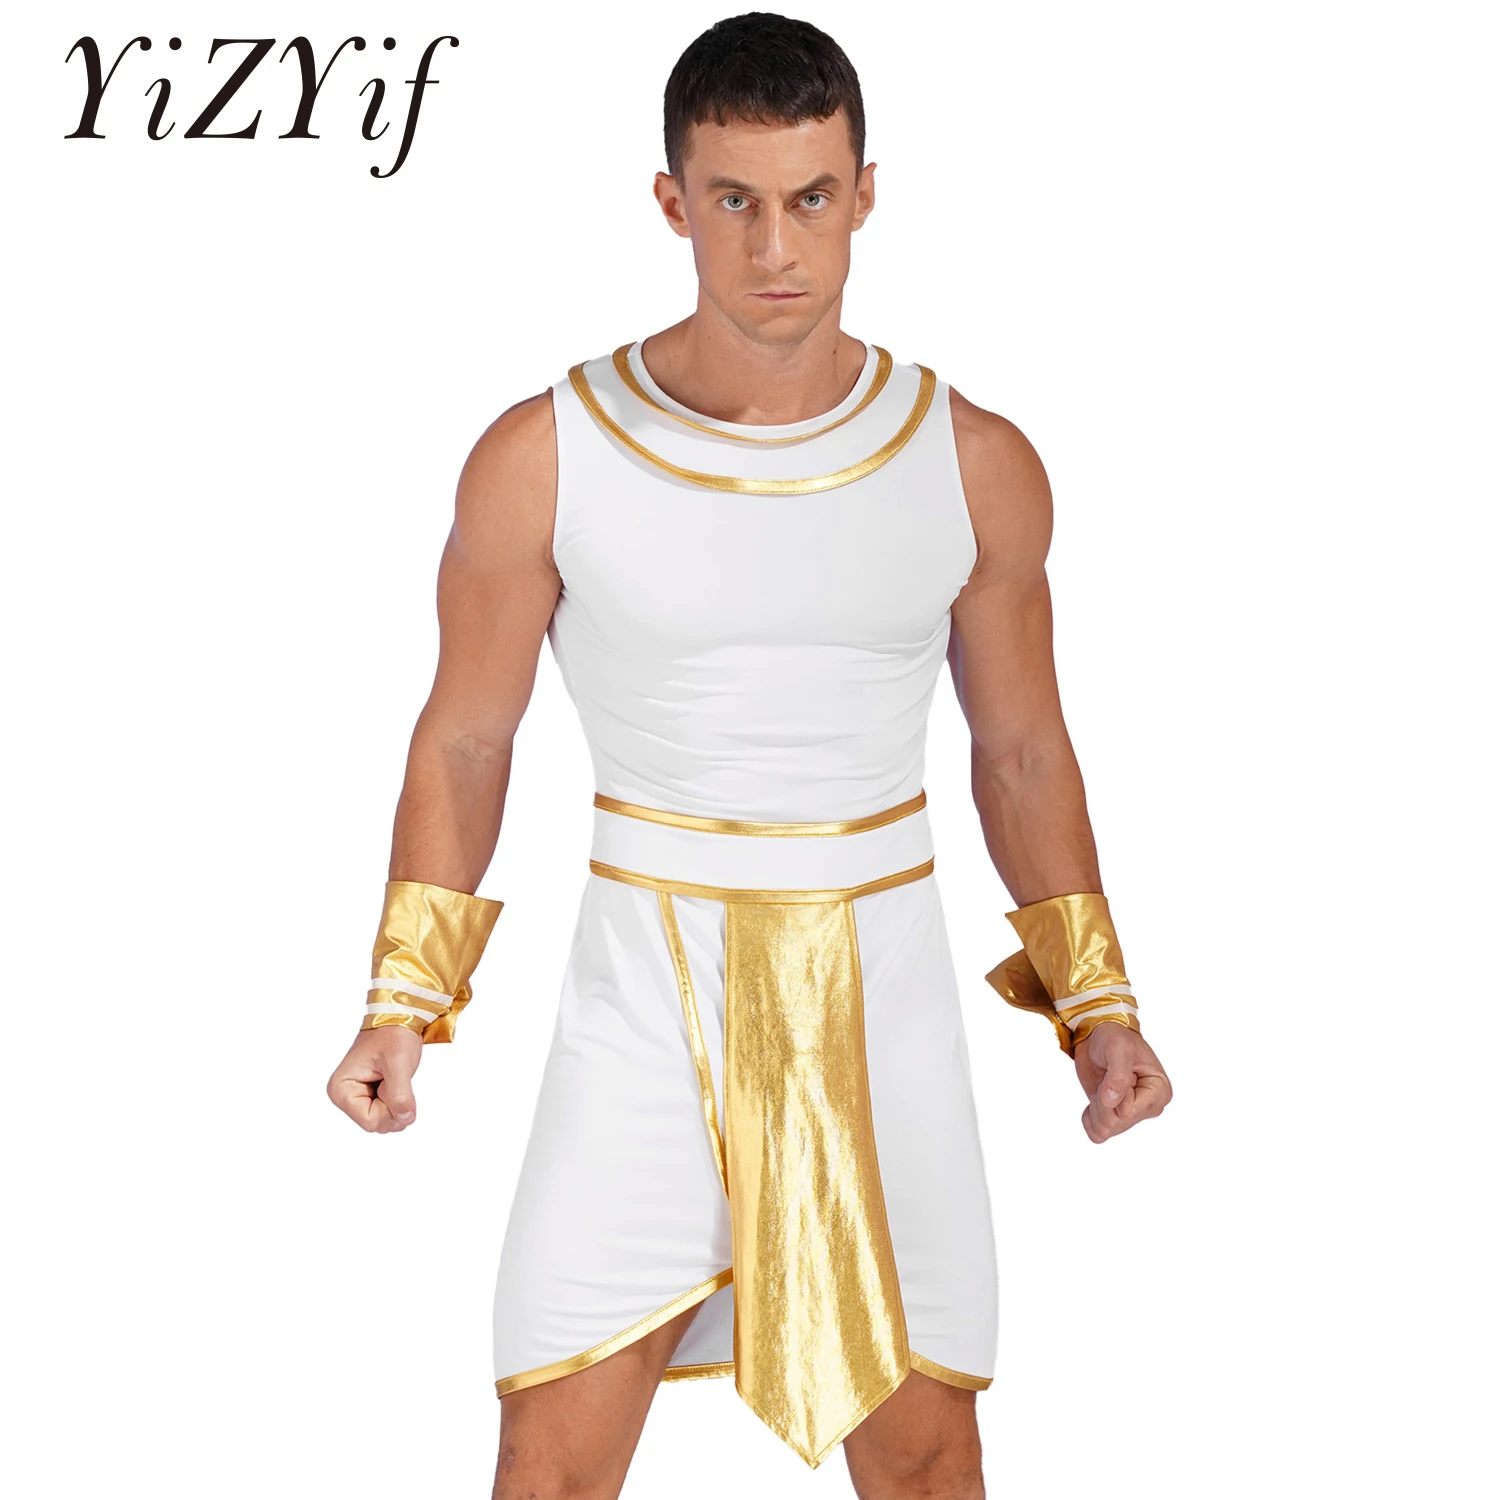 

Men Pharaoh Costume Adult Ancient Egypt King Cleopatra Role-Playing Outfit Sleeveless Dress+Cuffs Sets for Halloween Masquerade